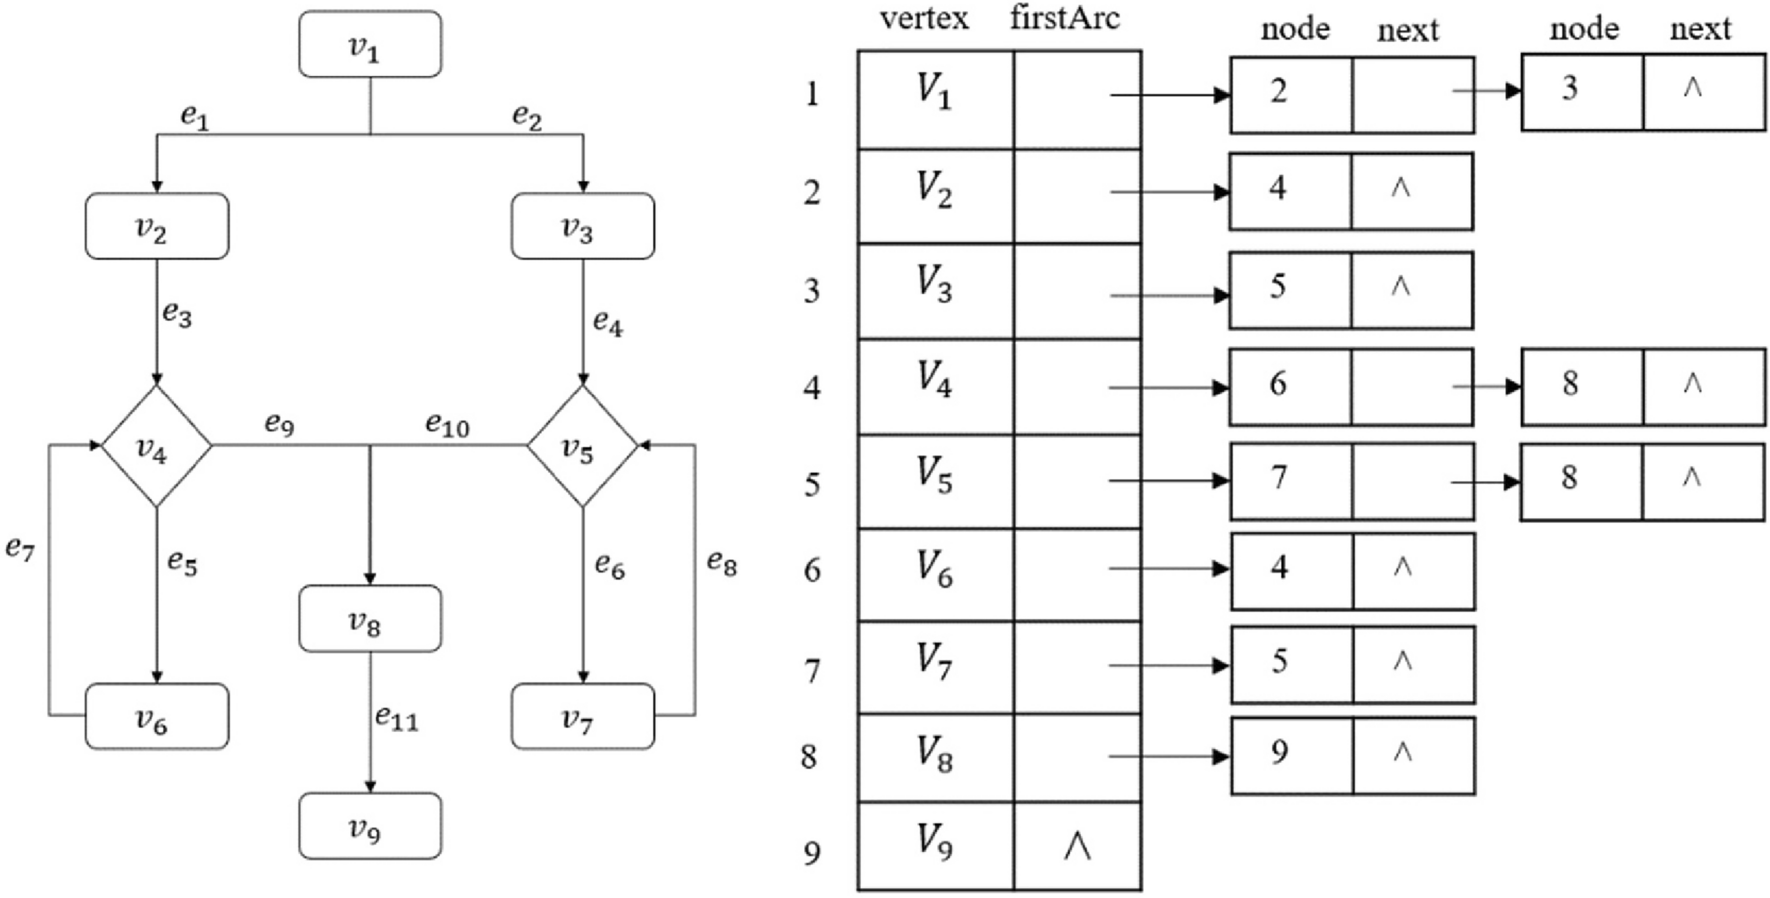 Hierarchical data structures for flowchart